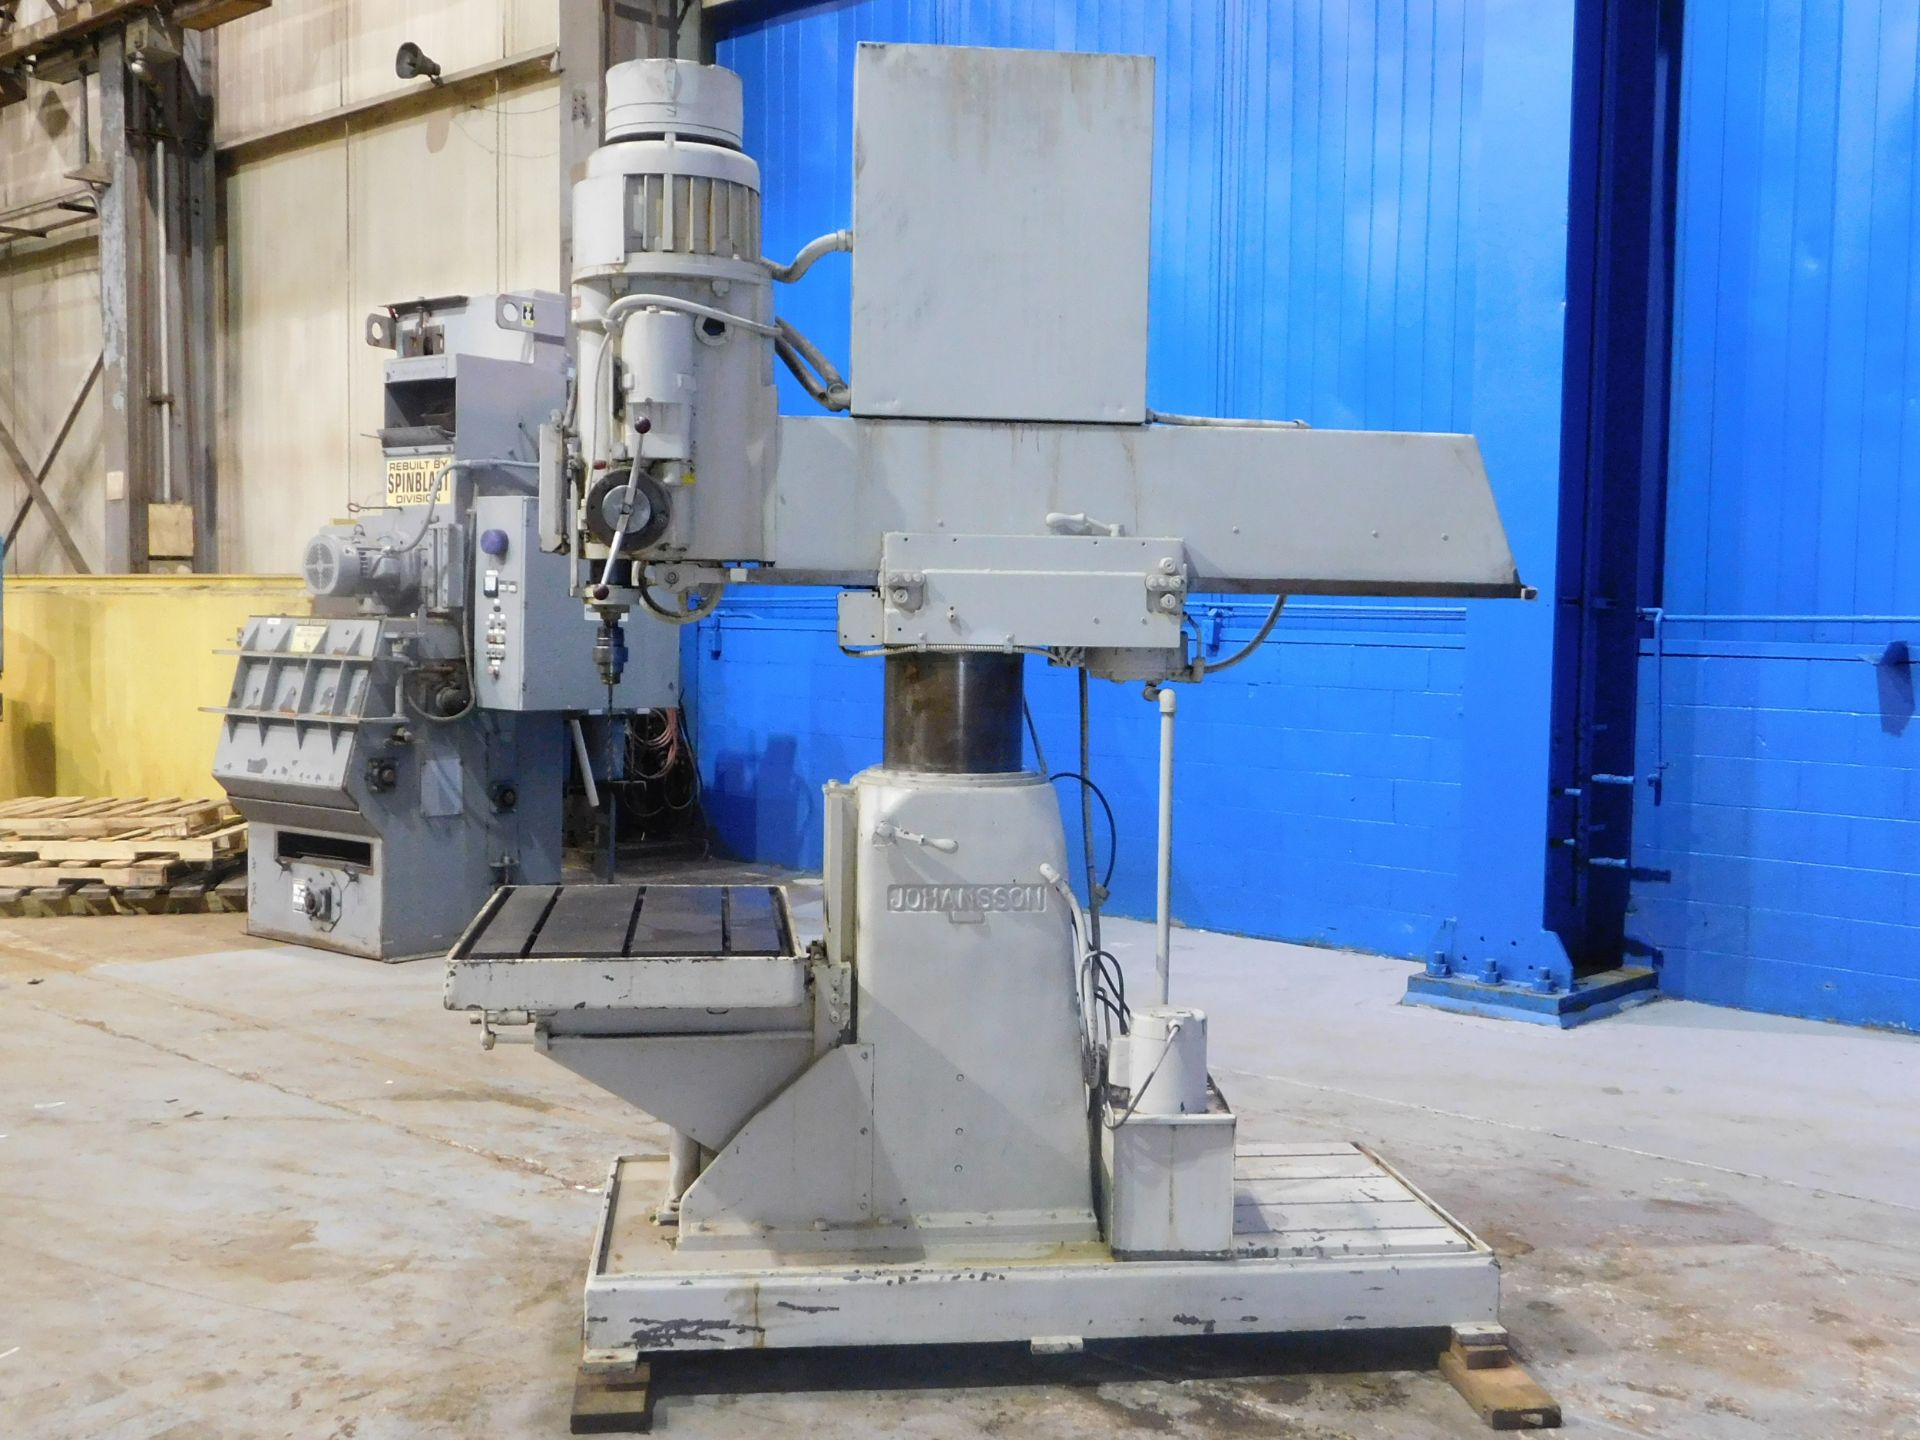 Johansson Radial Arm Drill, 3' x 11", S/N: 51621, Located In: Painesville, OH - Image 5 of 9